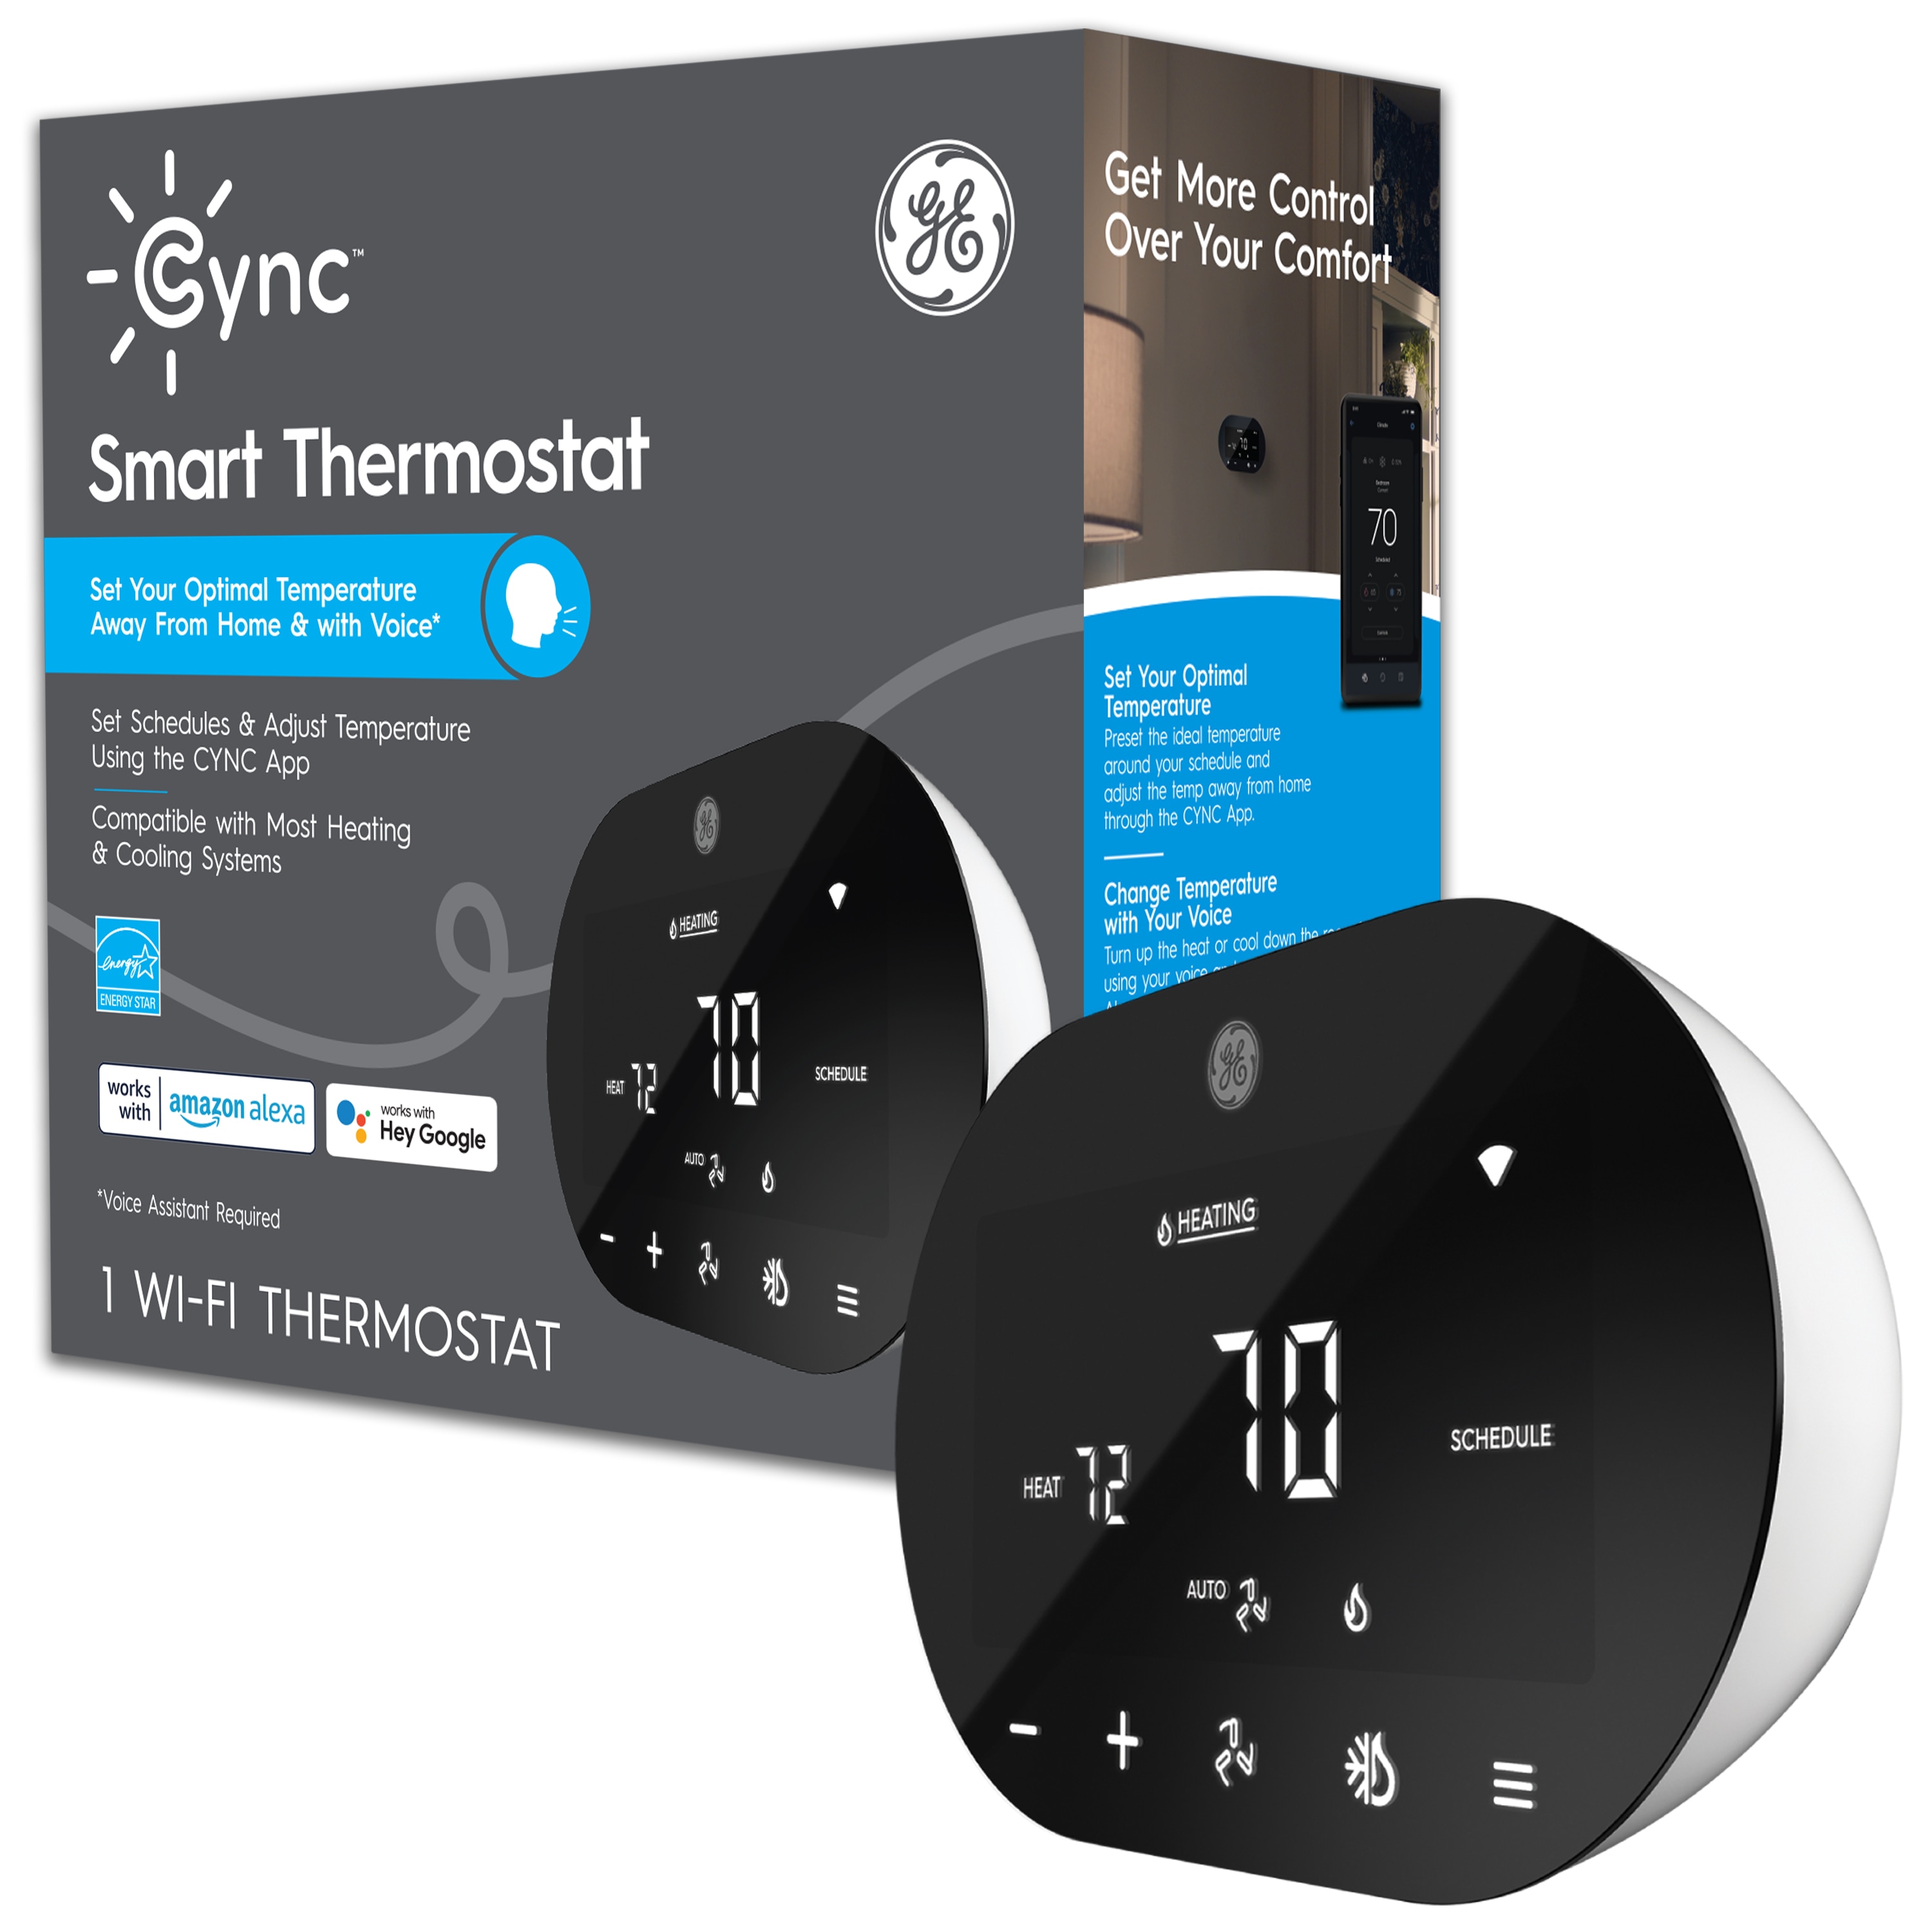 Cync Smart Thermostat by GE